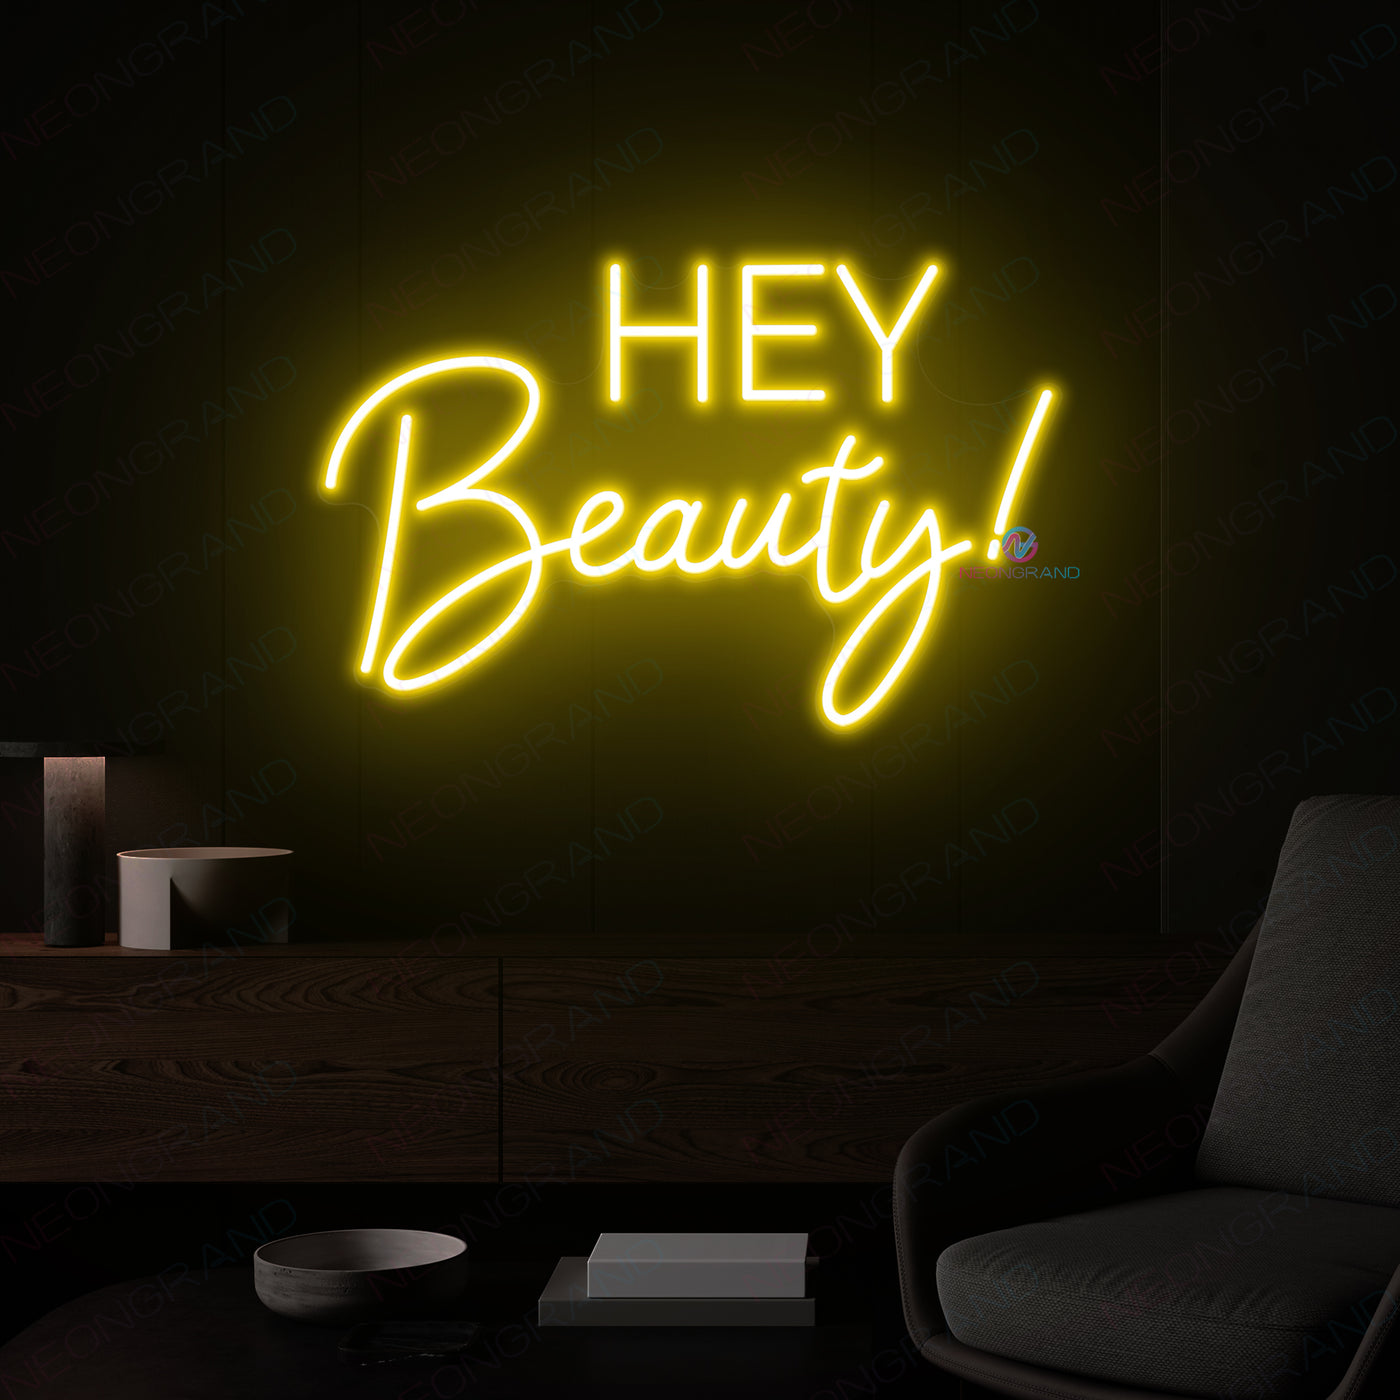 Hey Beauty Neon Sign Led Light Man Cave Neon Signs yellow